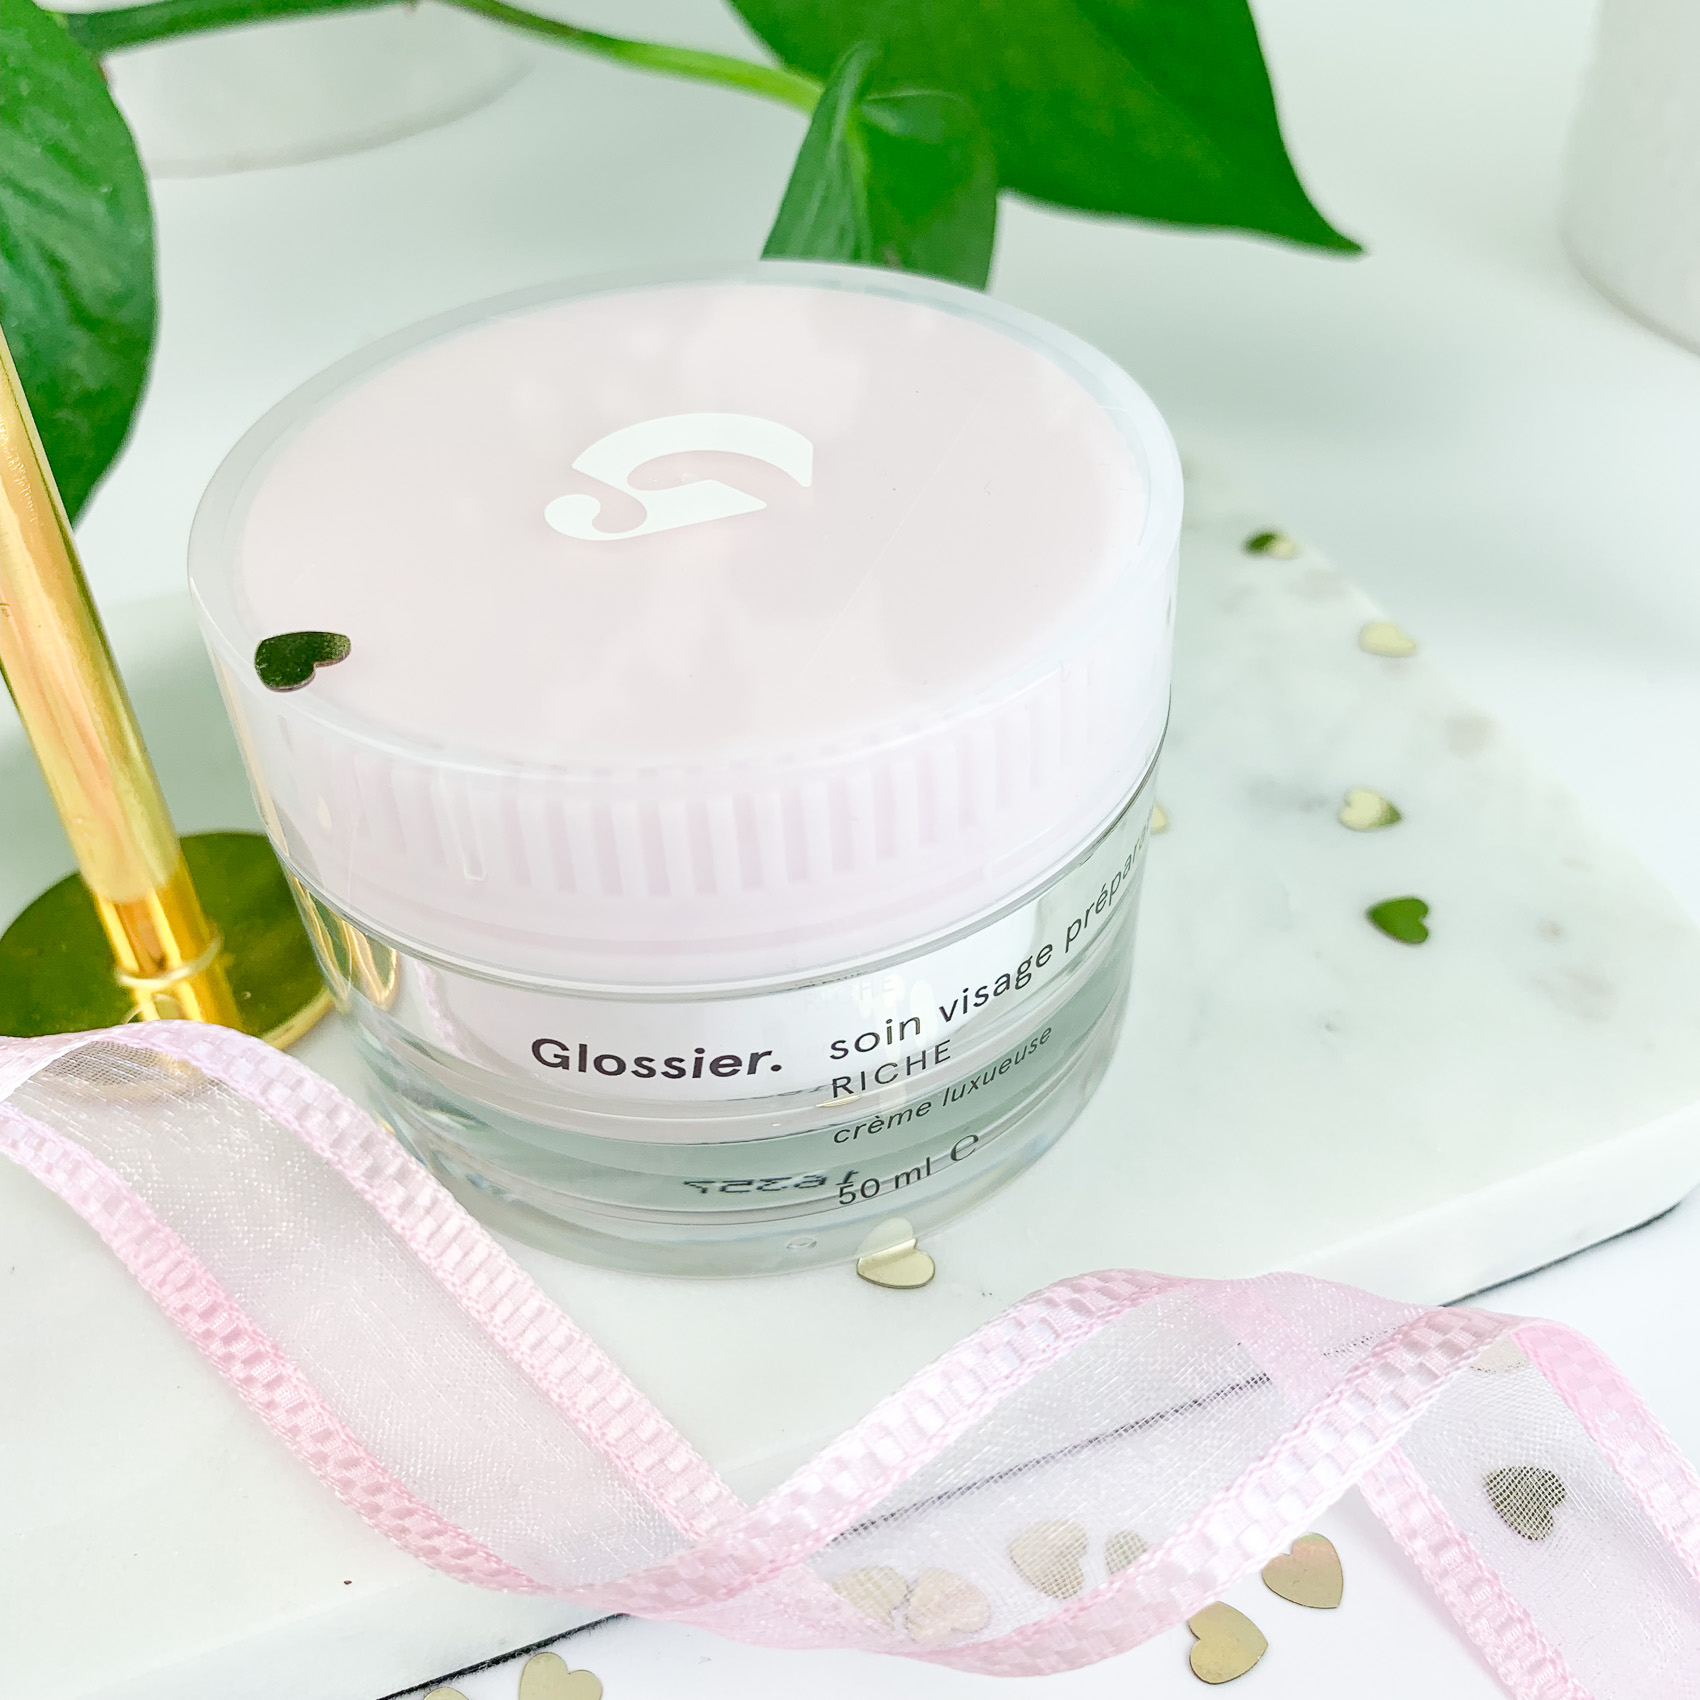 New Glossier Products - Claire Baker